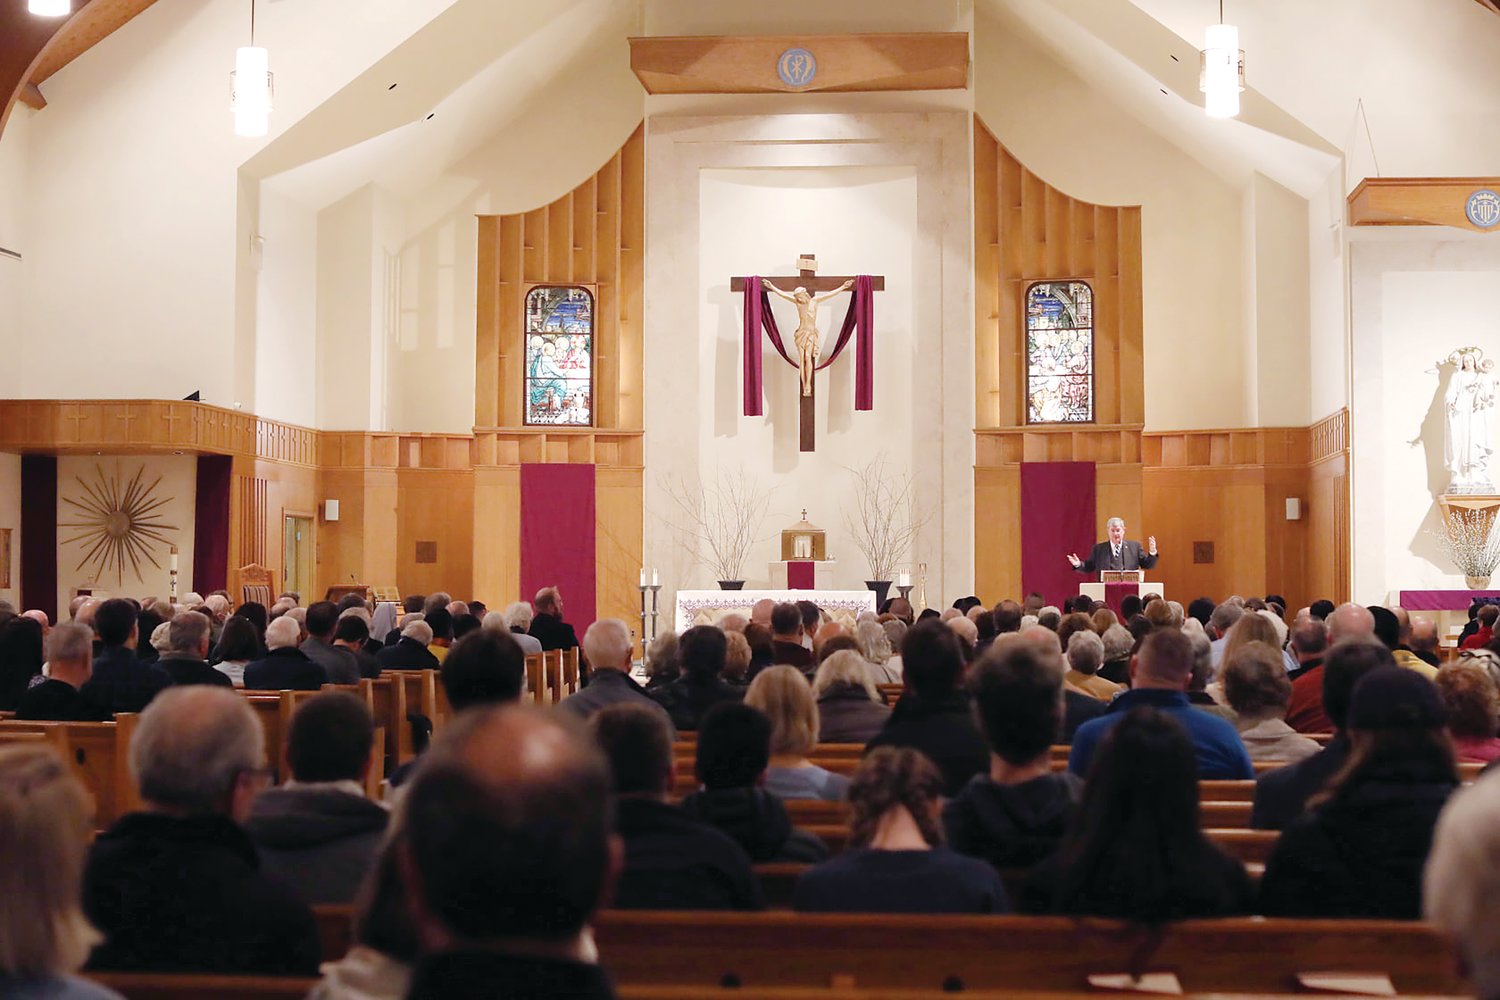 As part of the 150th anniversary celebration, the Diocese of Providence welcomed George Weigel to Our Lady of Mercy Church. Hundreds gathered to listen to the author’s lecture on “The Catholic Moment.”